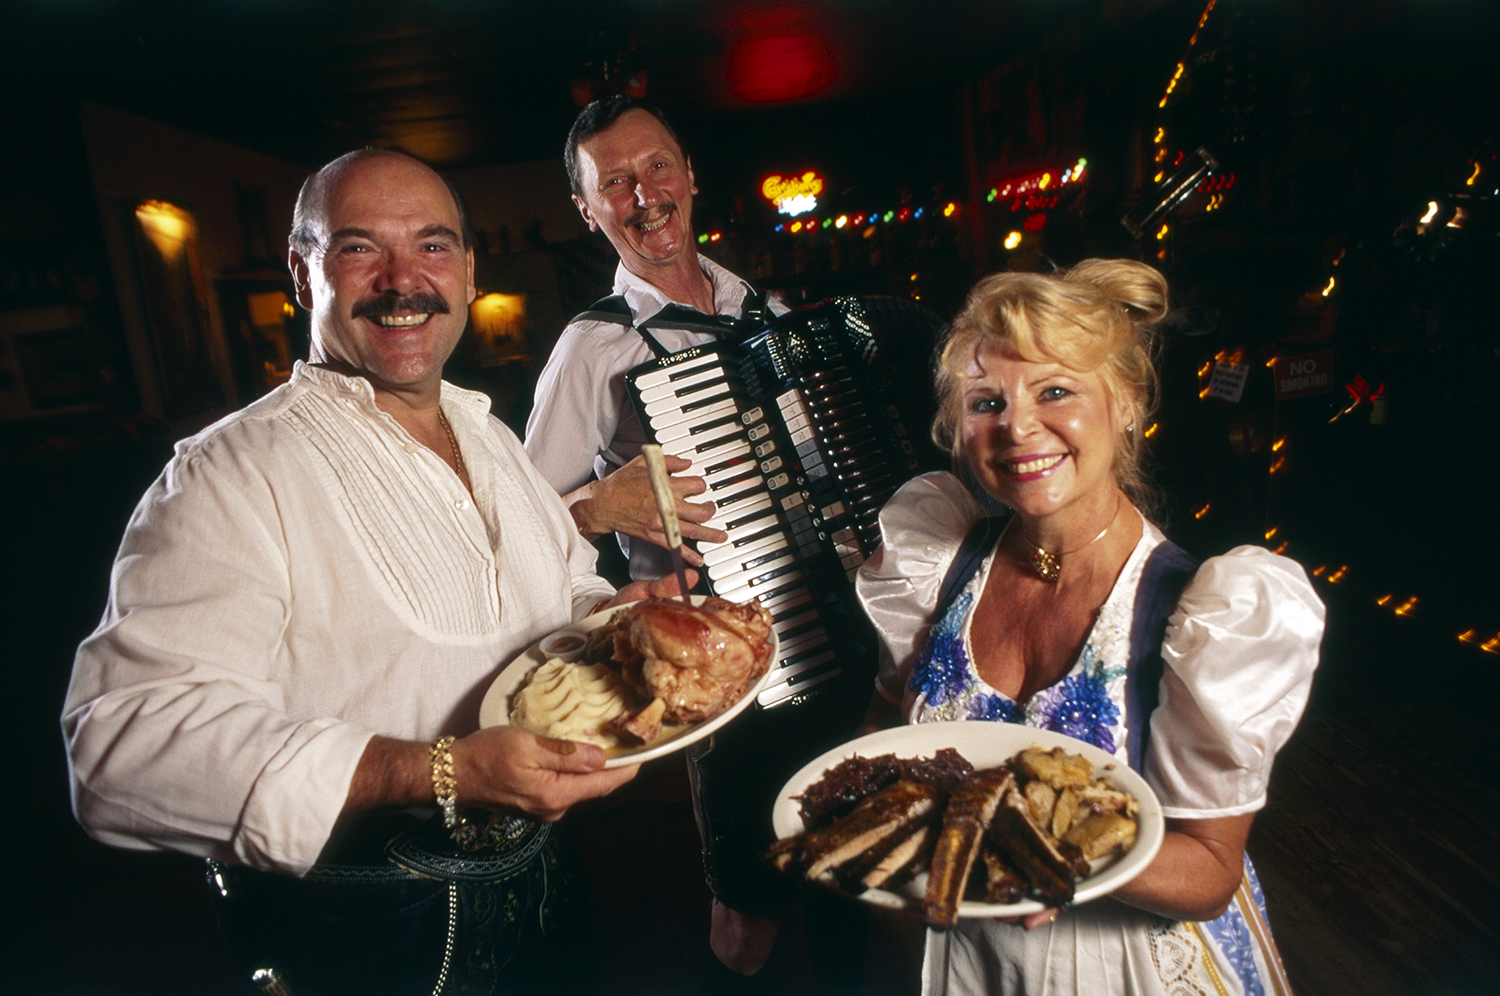 Color photo of three people holding plates of food and a musical instrument.